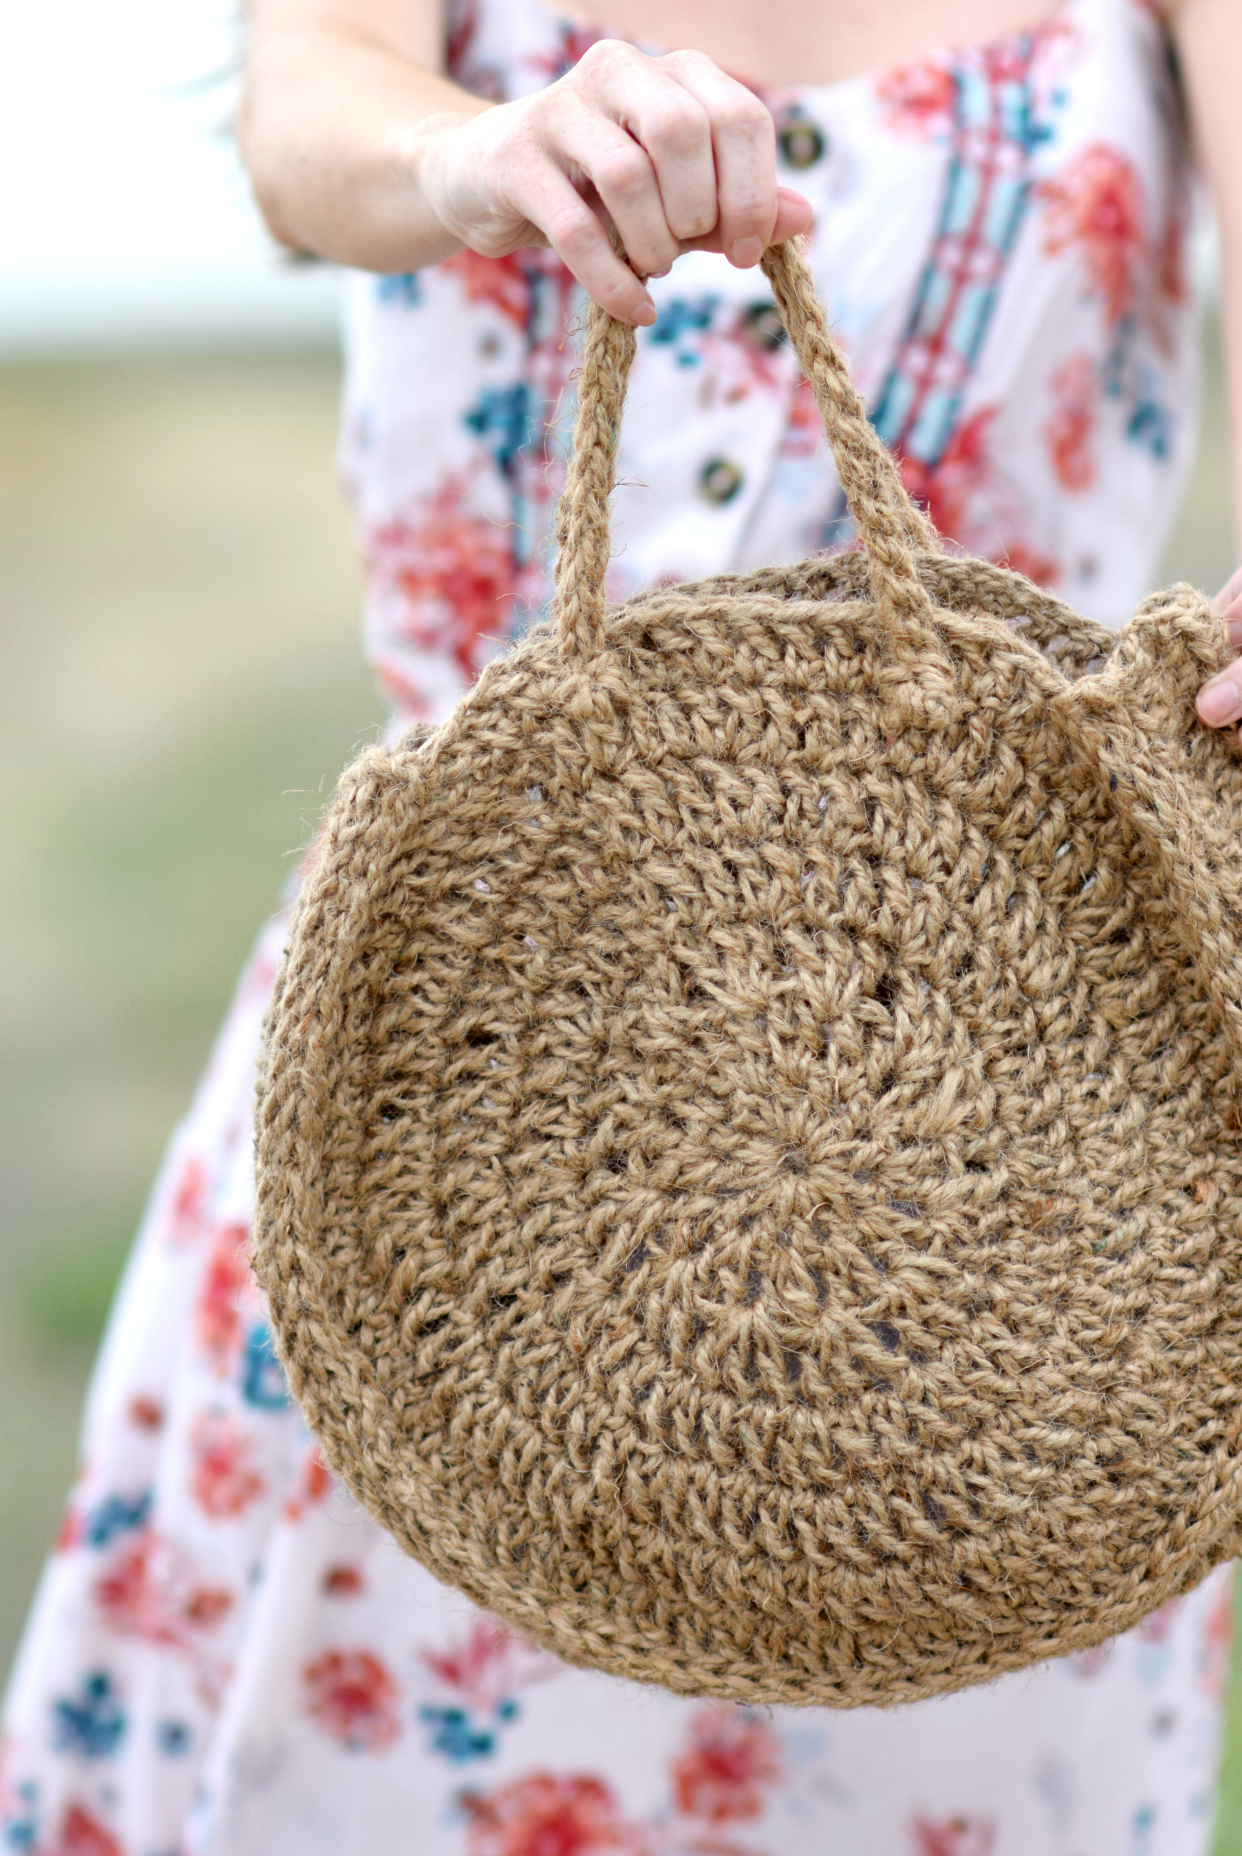 How to Make a Lining for a Round Crocheted Bag | LillaBjörn's Crochet World